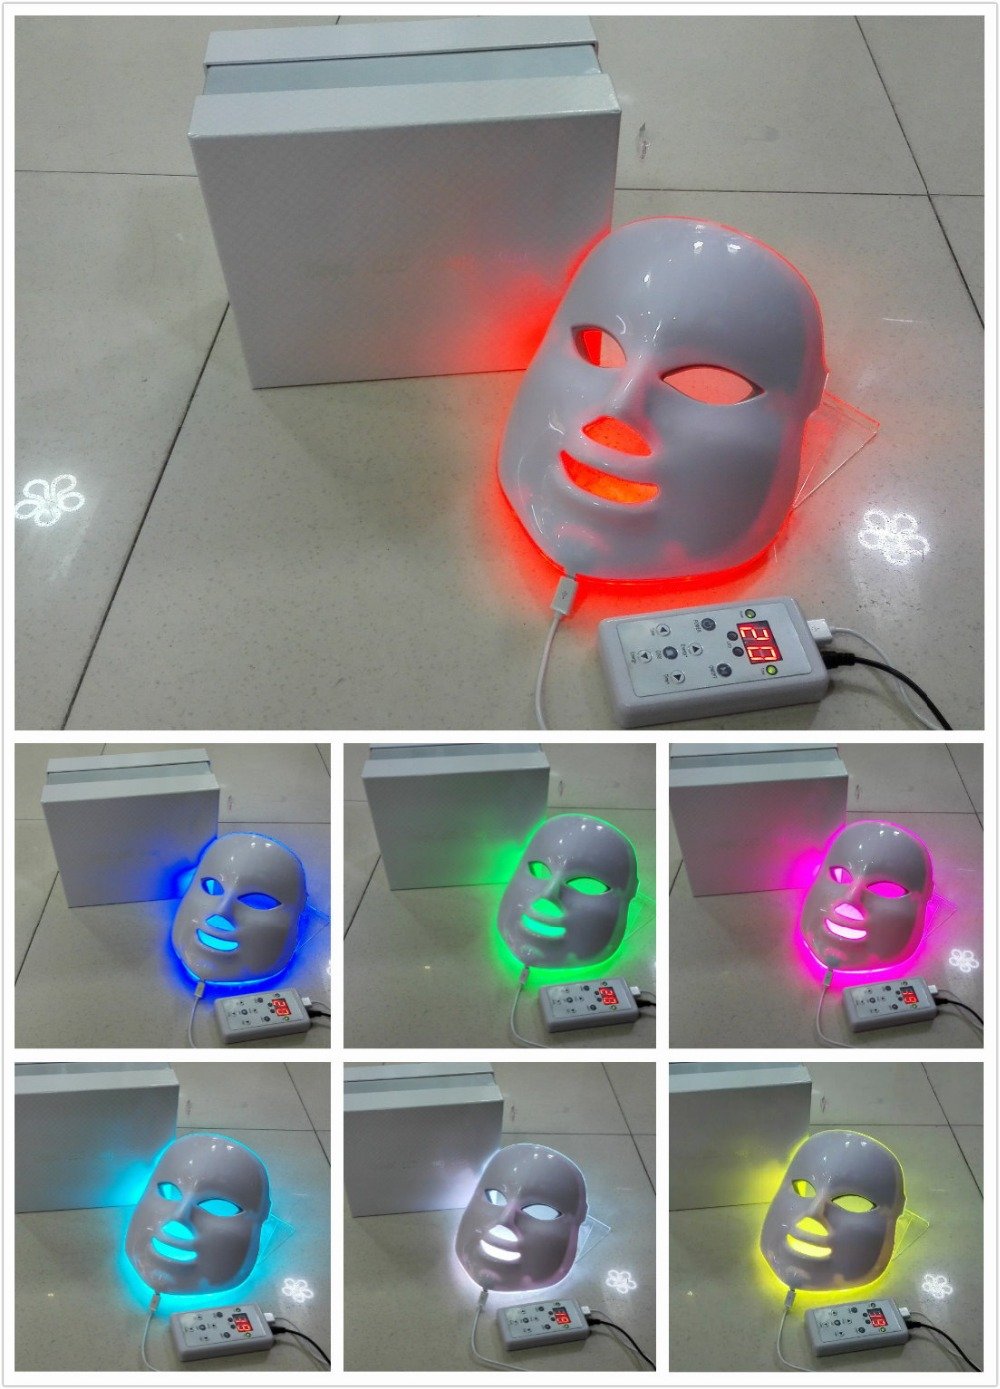 7 Colors Light Photon LED Electric Facial Mask Therapy beauty salon Anti-Aging Wrinkle Removal Skin PDT Skin Rejuvenation Device